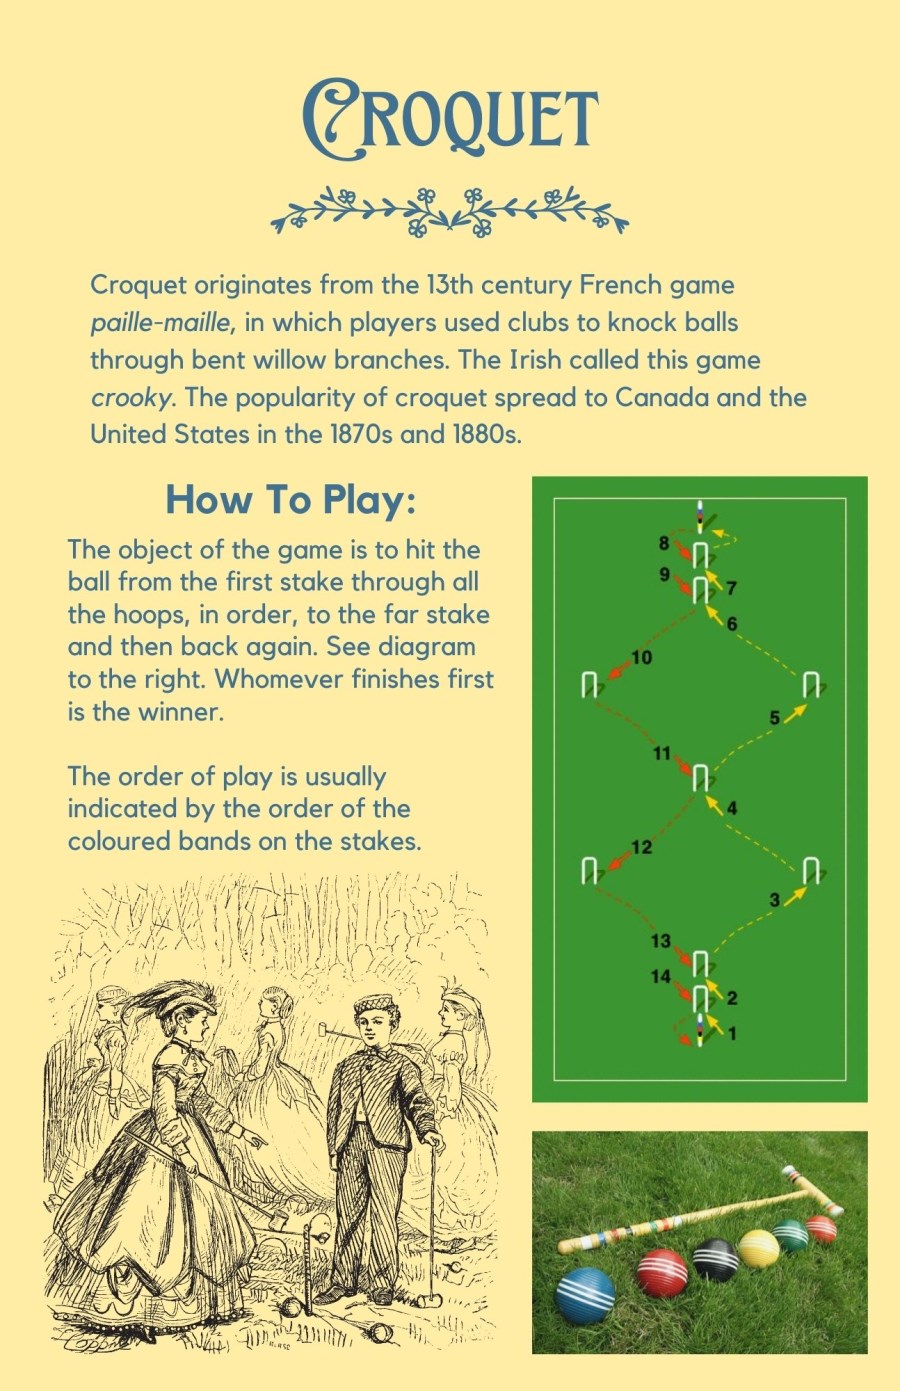 An infographic on croquet